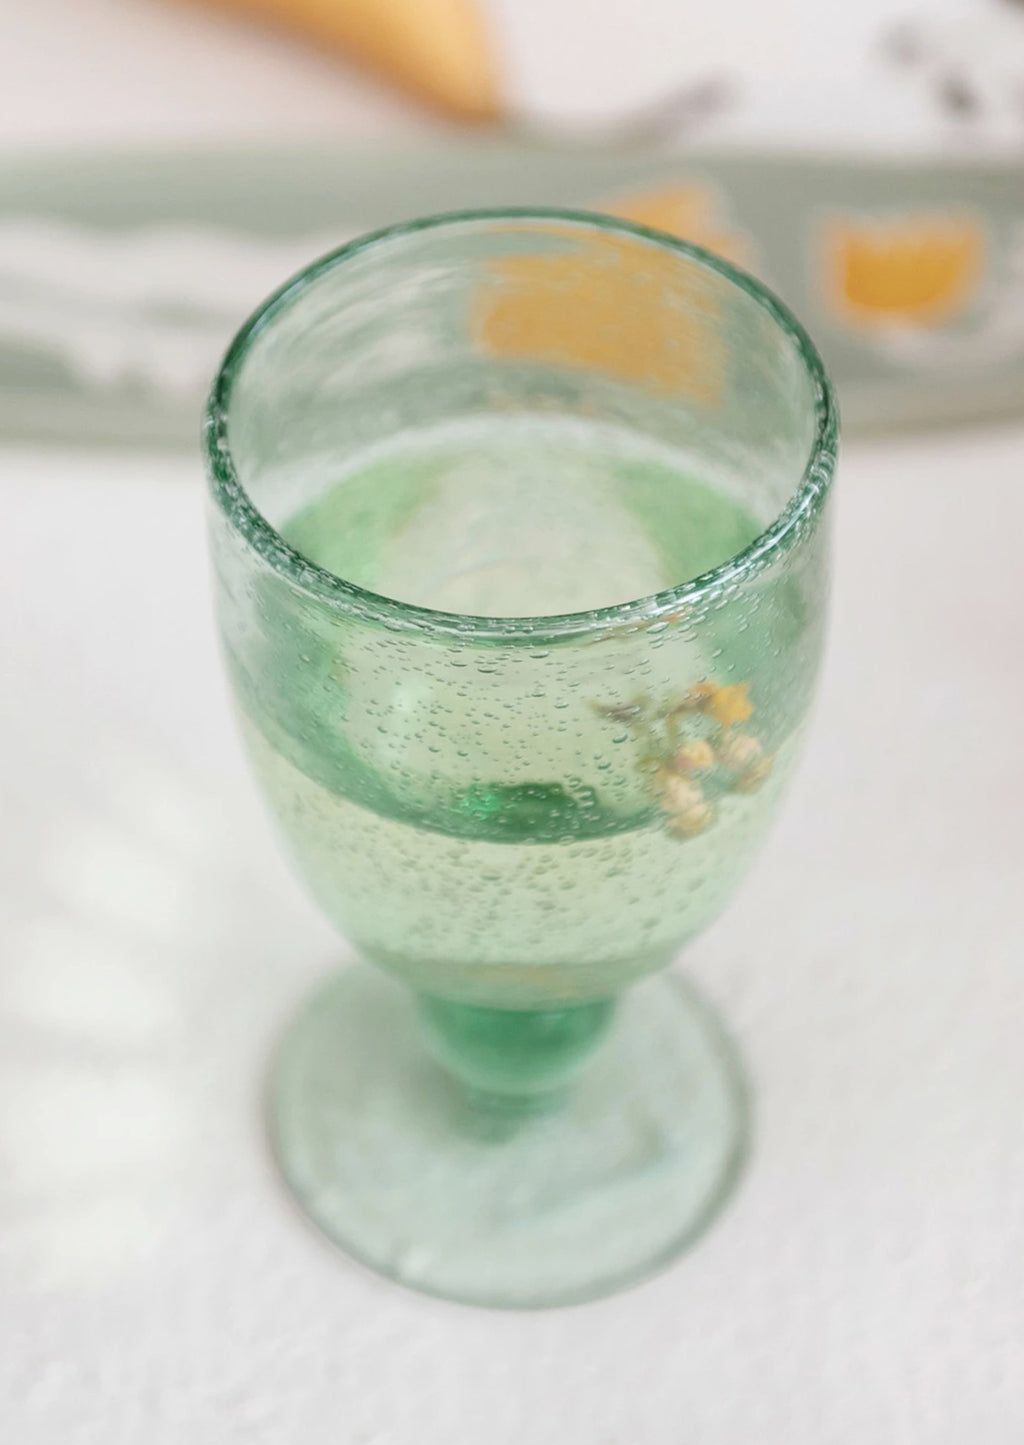 2: A wine glass made of recycled glass.